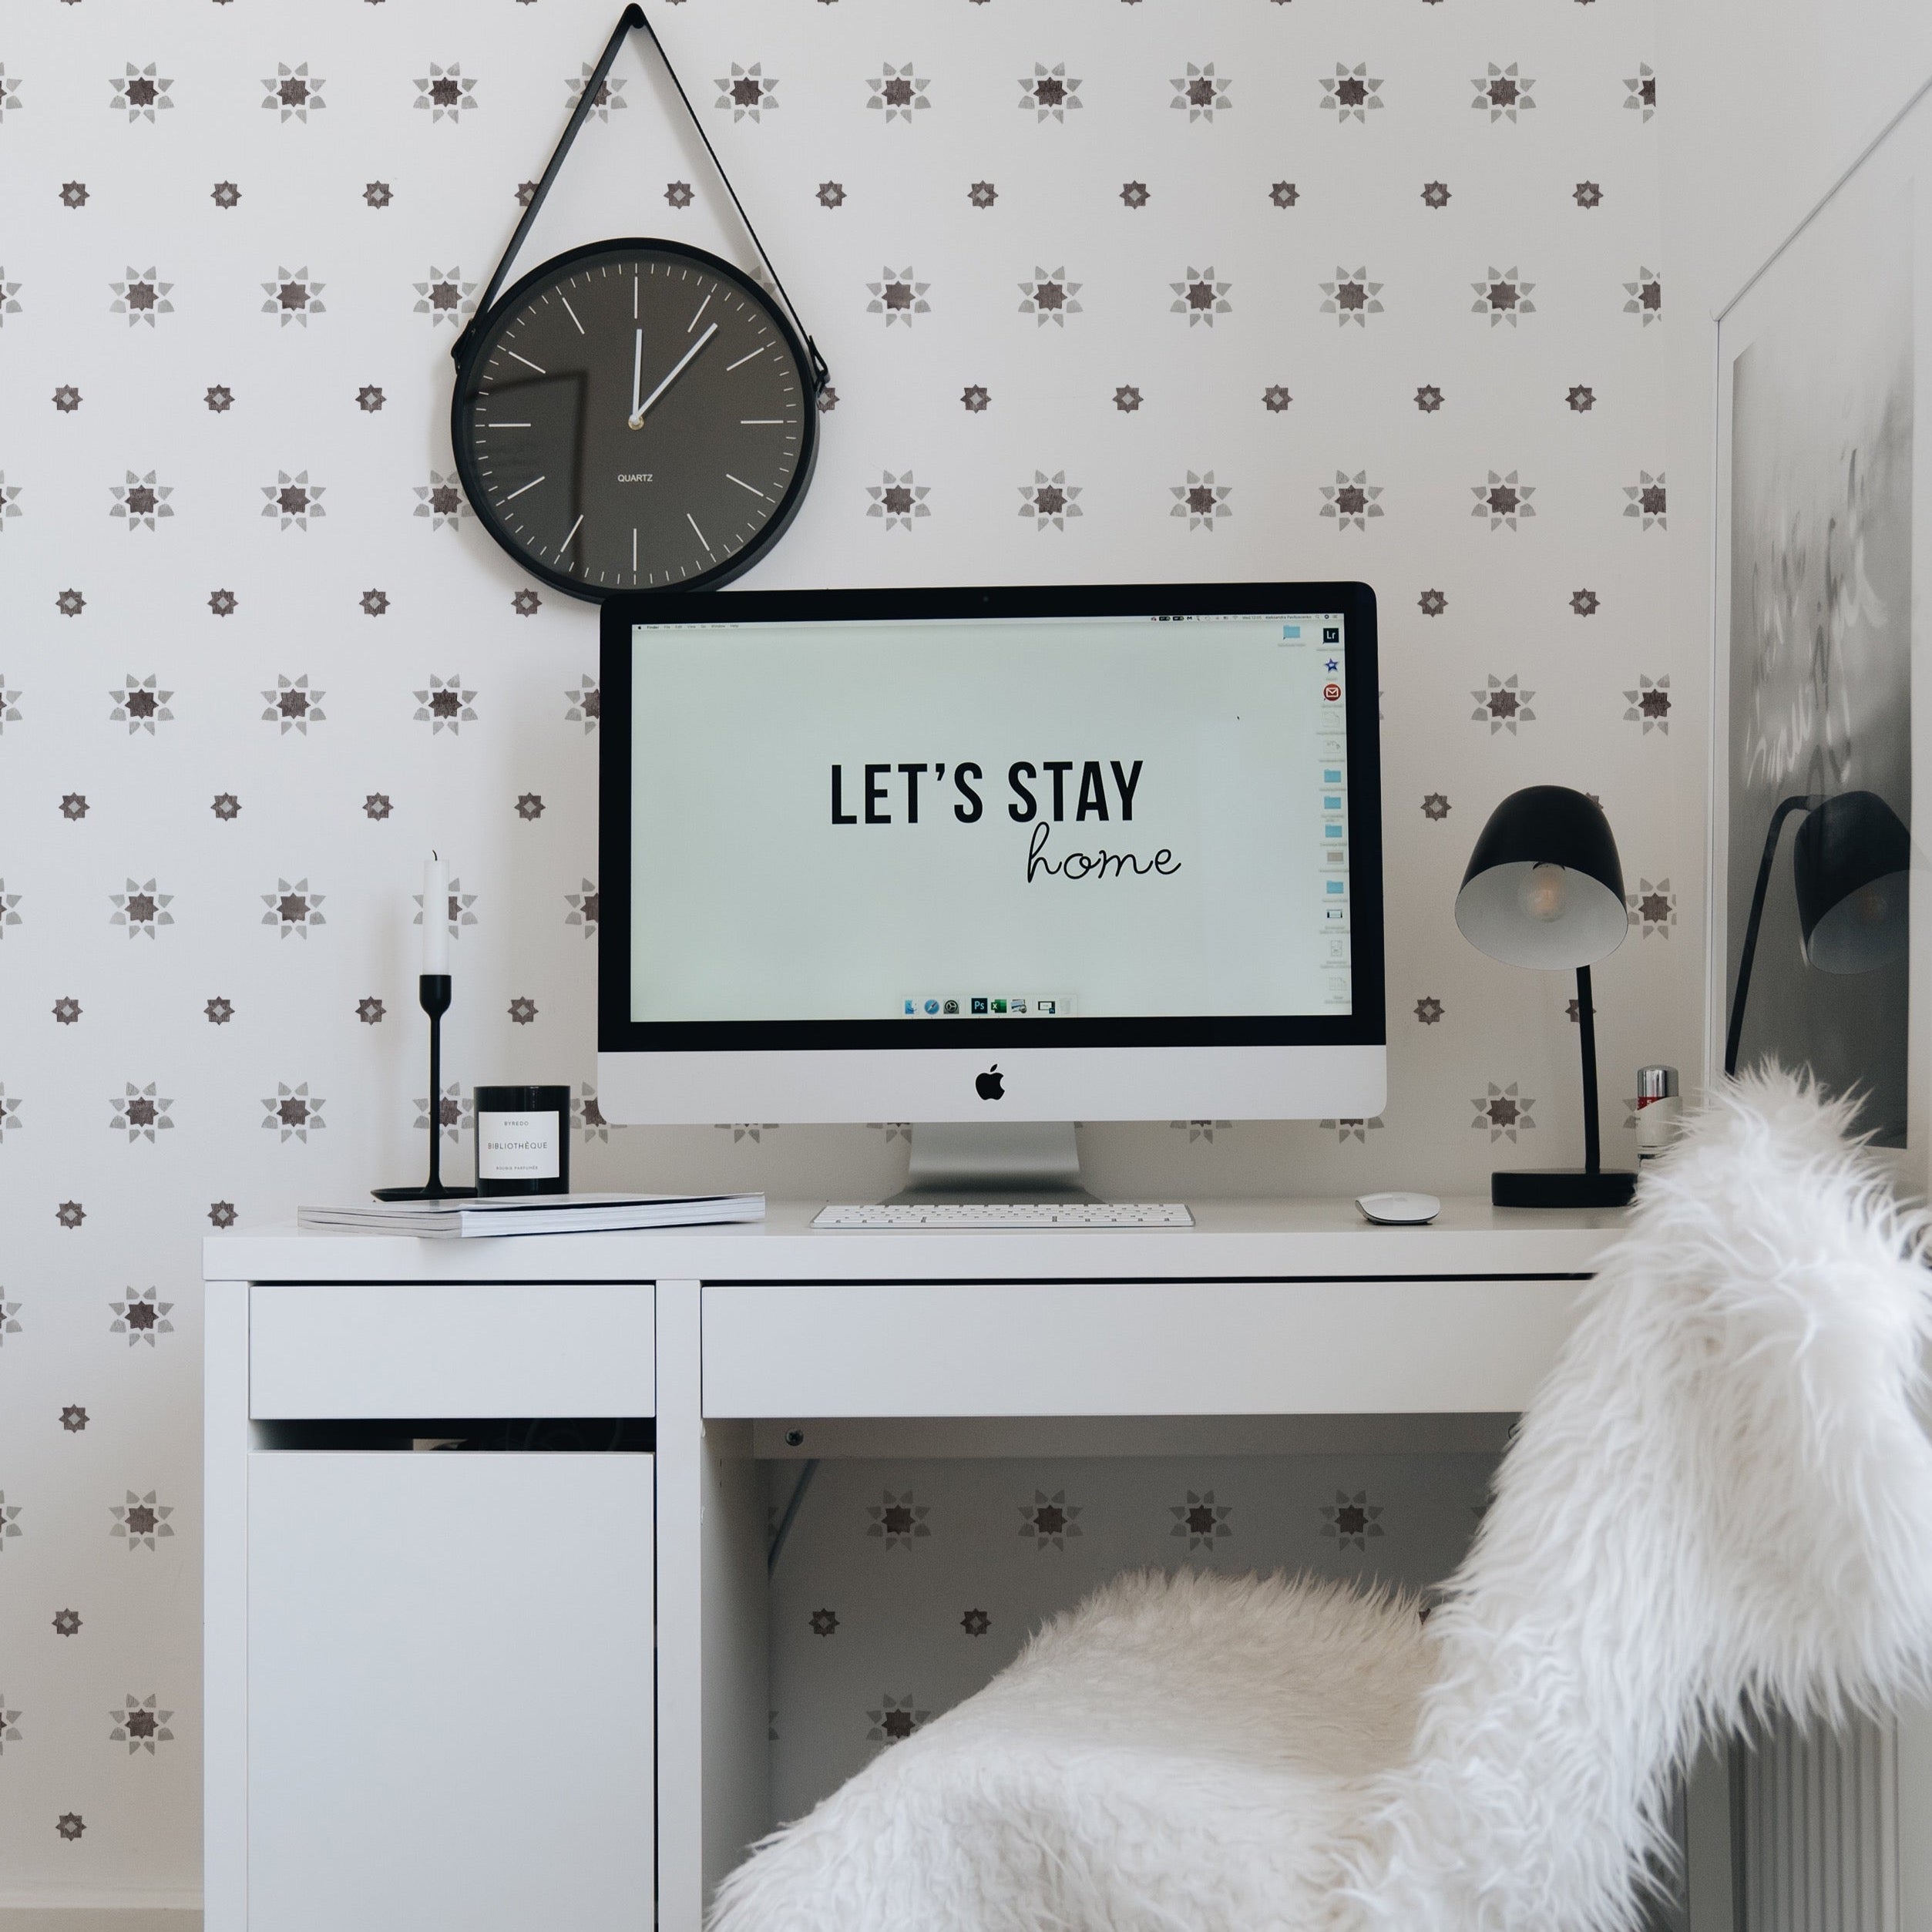 A stylish home office setup with 'Hand Painted Azulejos Wallpaper' featuring a delicate pattern of grey star-shaped designs. The wallpaper adds a subtle yet sophisticated touch to the space, complemented by a modern desk, white fluffy chair, and a wall-mounted clock.